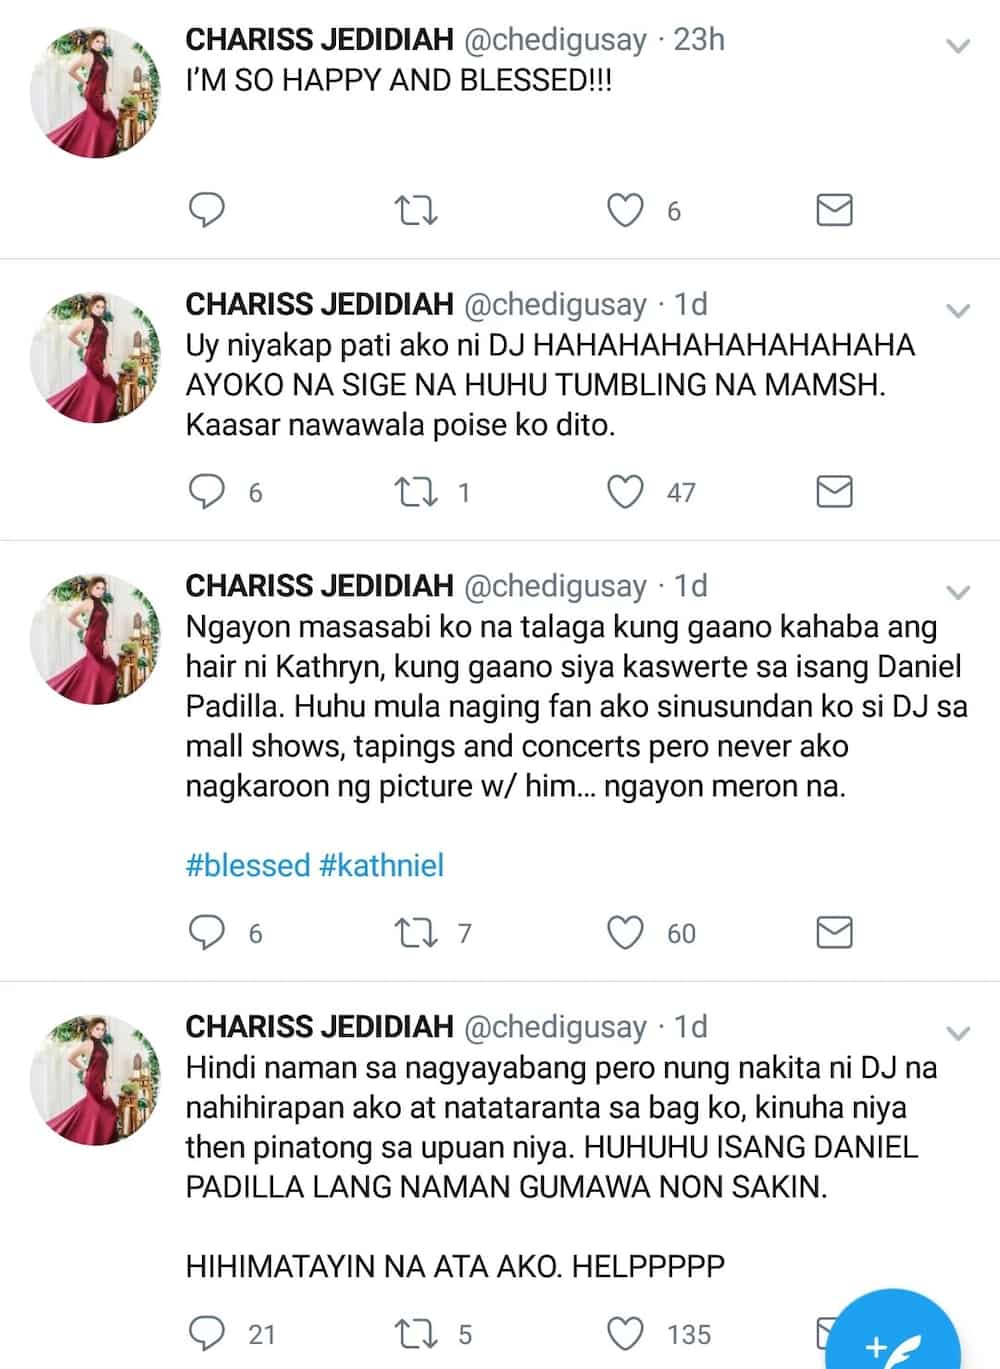 Beastmode ang KN fans sayo ate girl! Fan claims that Daniel Padilla asked for her number and name